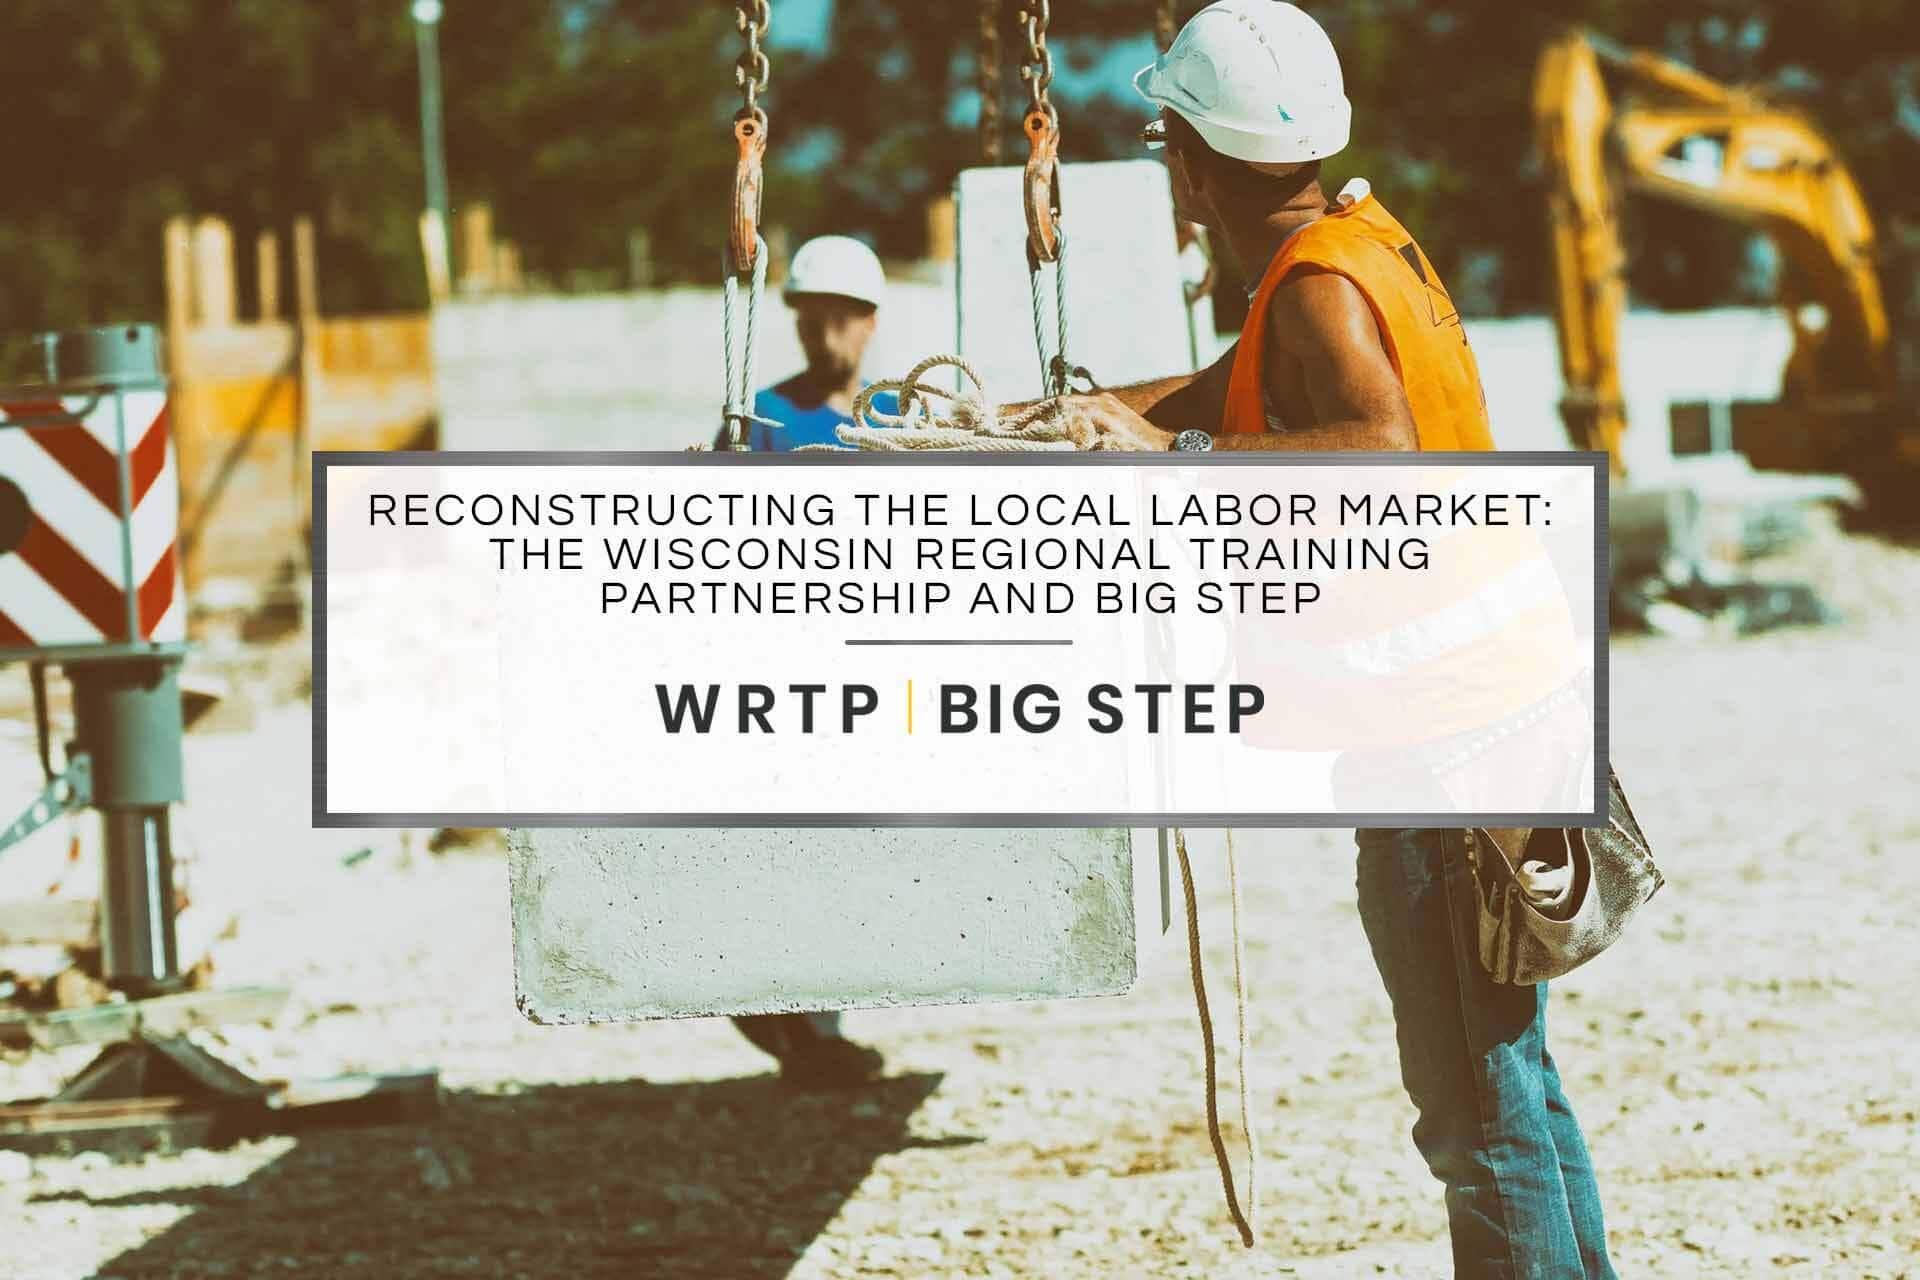 Reconstructing the Local Labor Market: The Wisconsin Regional Training Partnership and BIG STEP